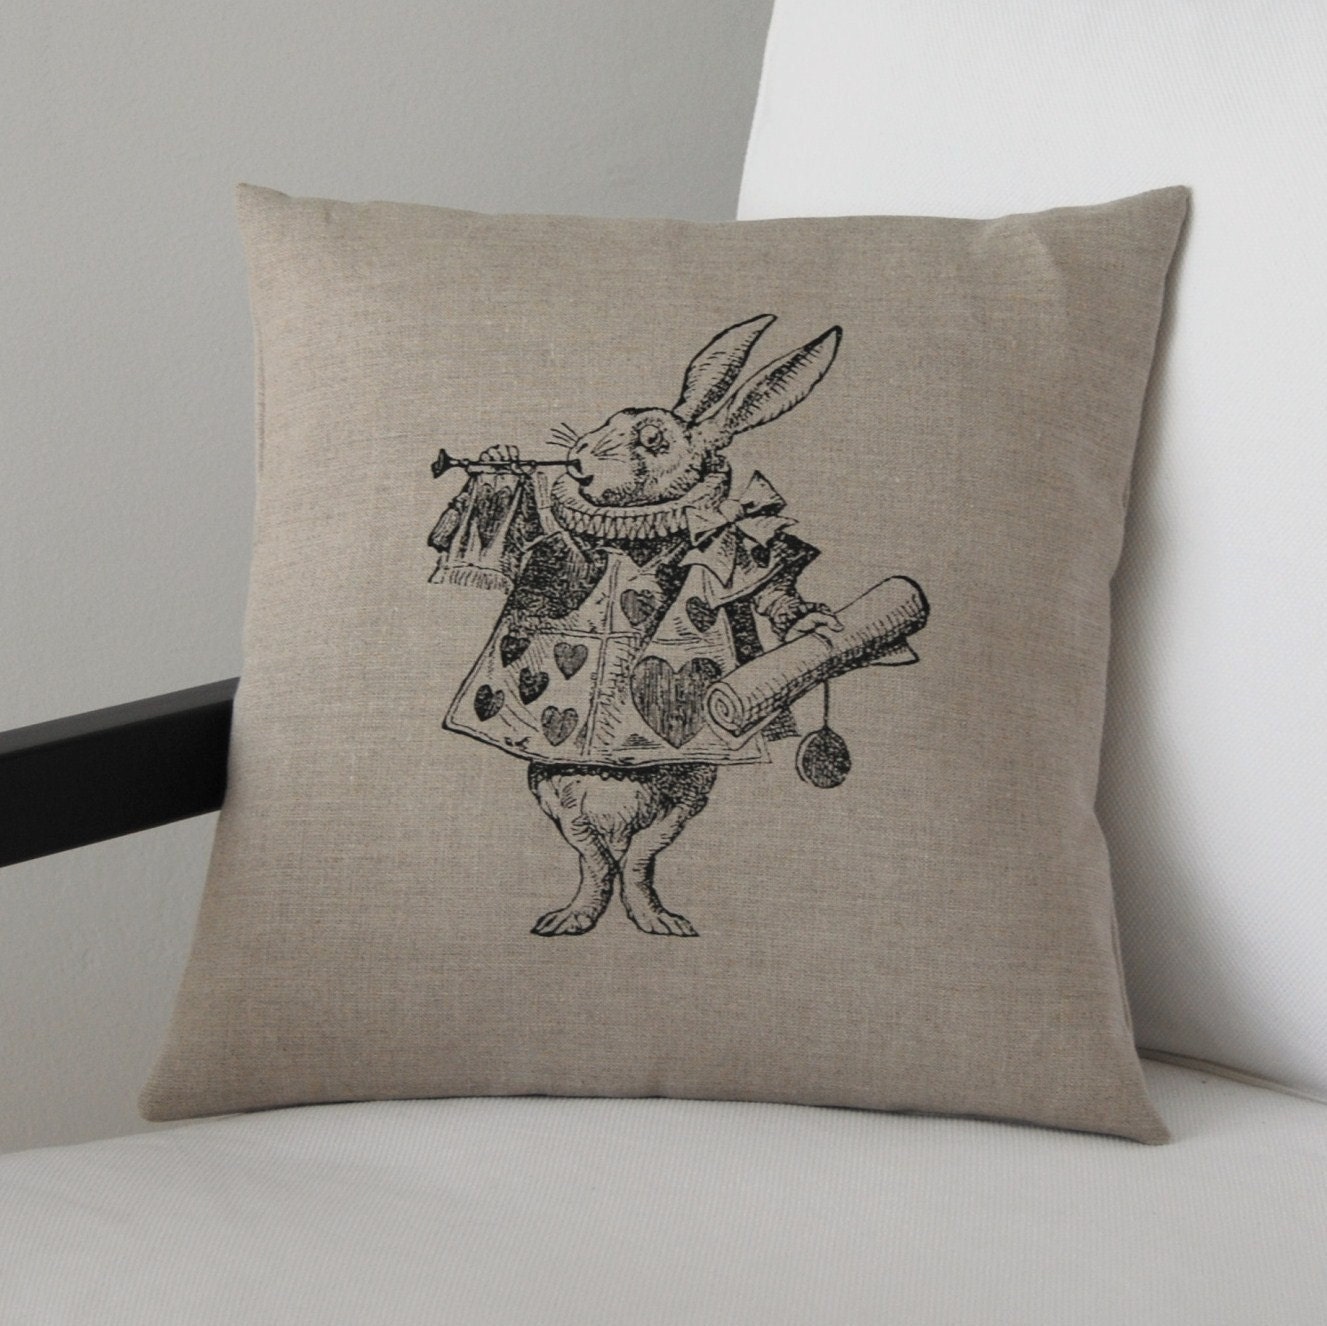 The White Rabbit Pillow Cover